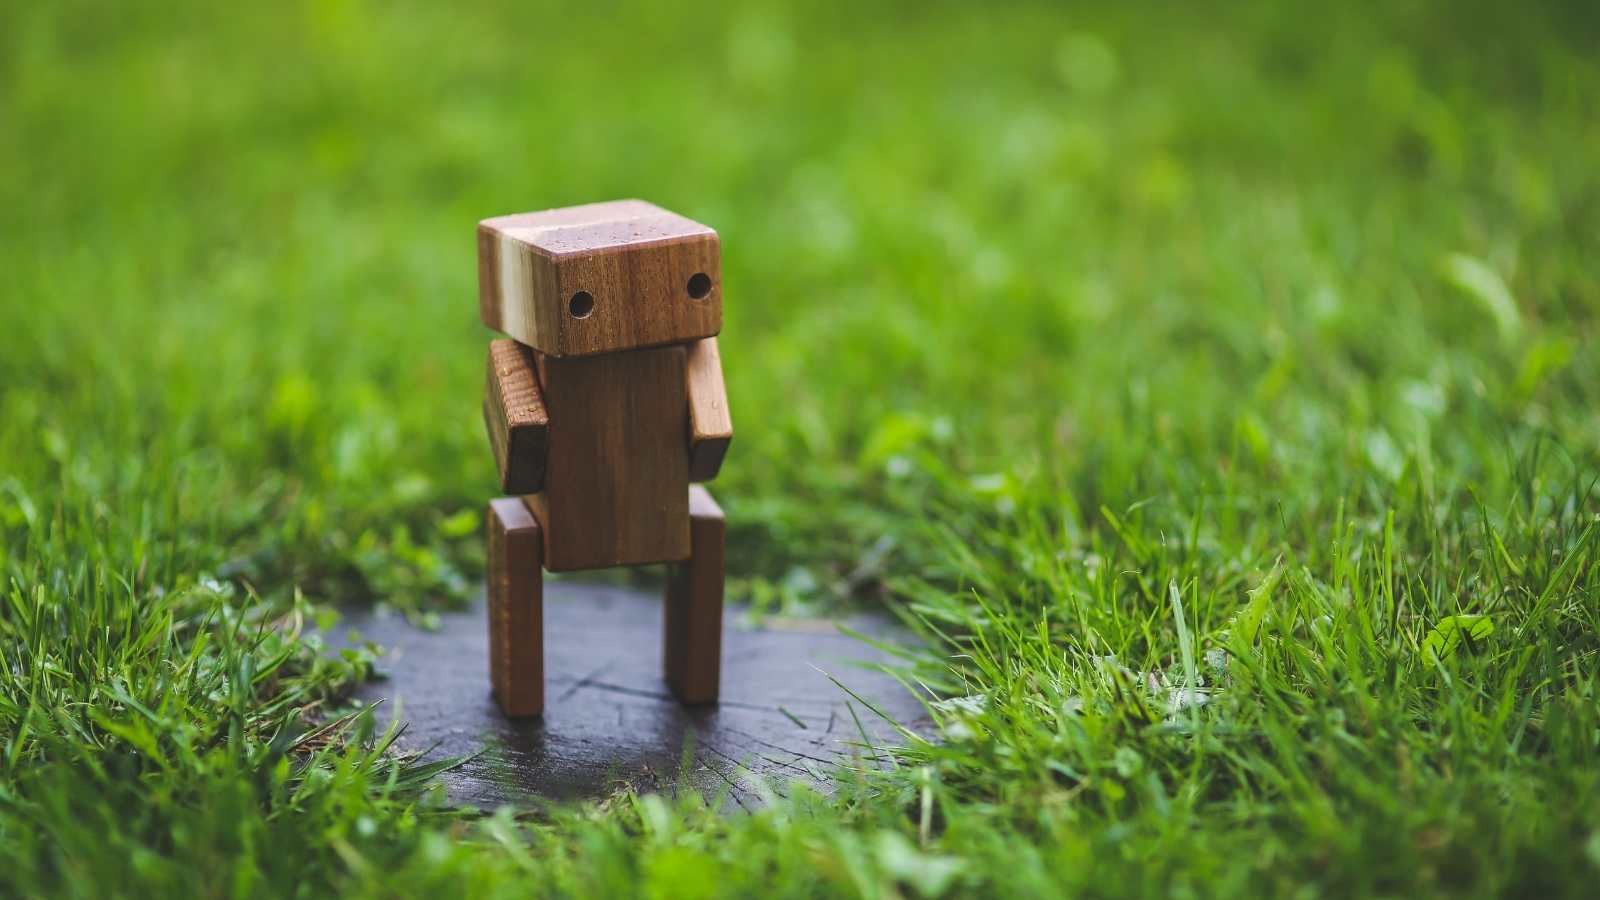 Wooden toy robot surrounded by grass